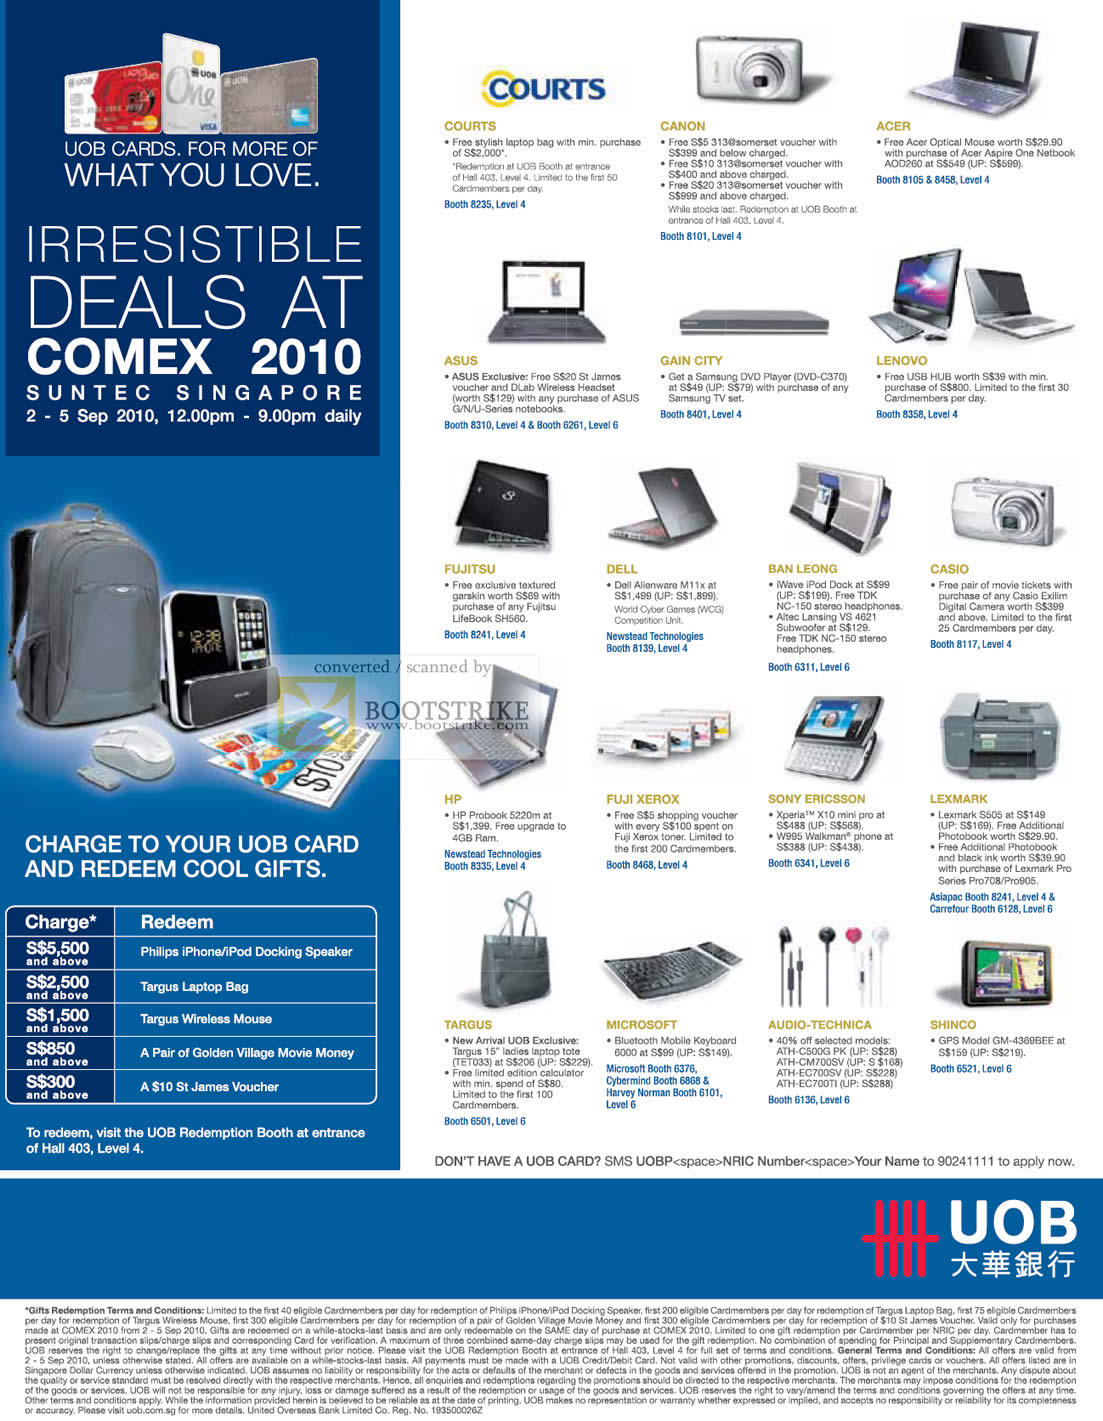 Comex 2010 price list image brochure of UOB Cards Deals Discounts Courts Canon Acer ASUS Gain City Lenovo Dell Casio Microsoft Targus Lexmark